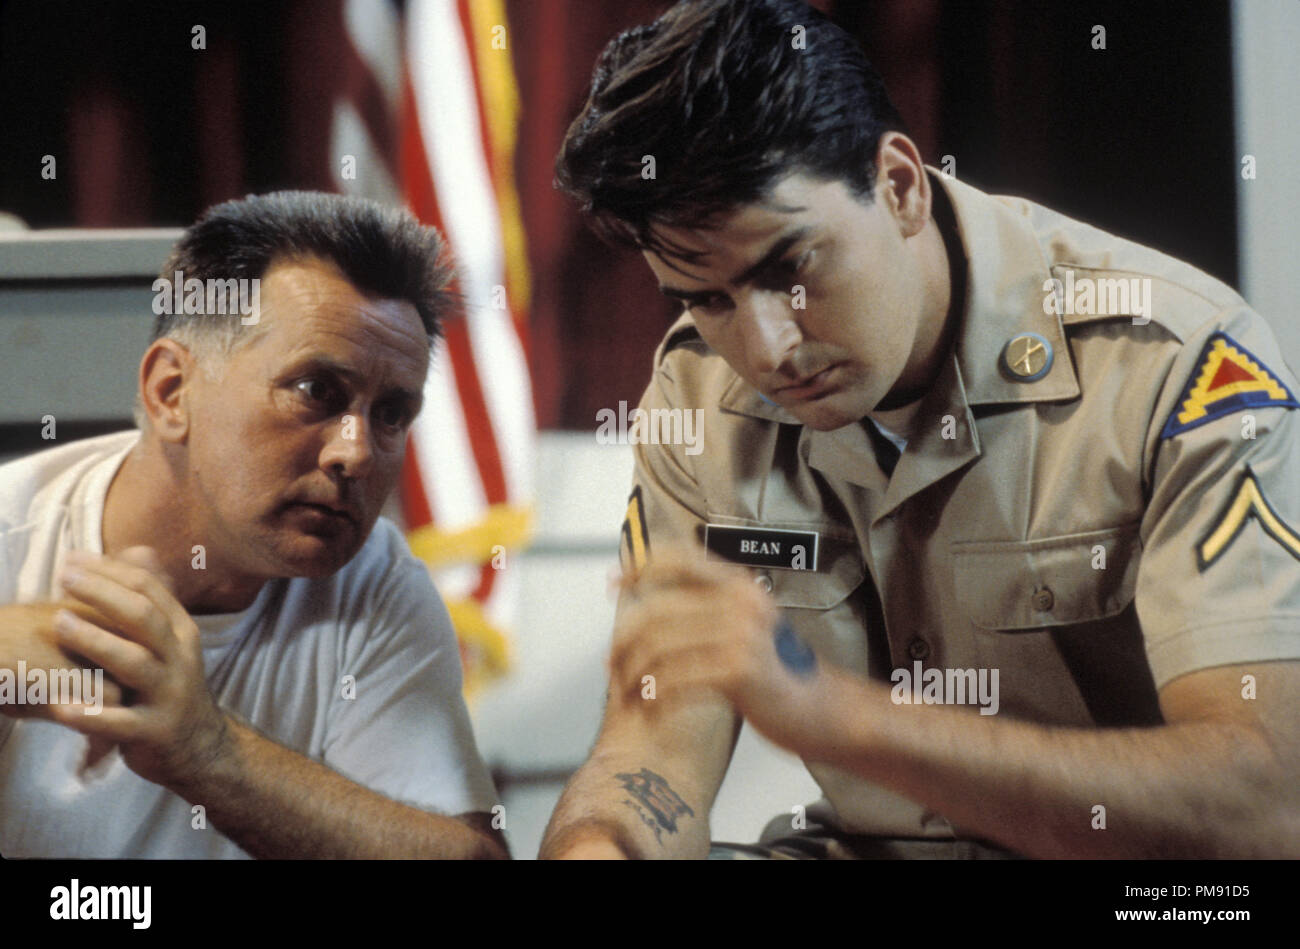 Film still or Publicity still from 'Cadence' Martin Sheen and Charlie Sheen © 1991 Northern Lights Media   All Rights Reserved   File Reference # 31527170THA  For Editorial Use Only Stock Photo